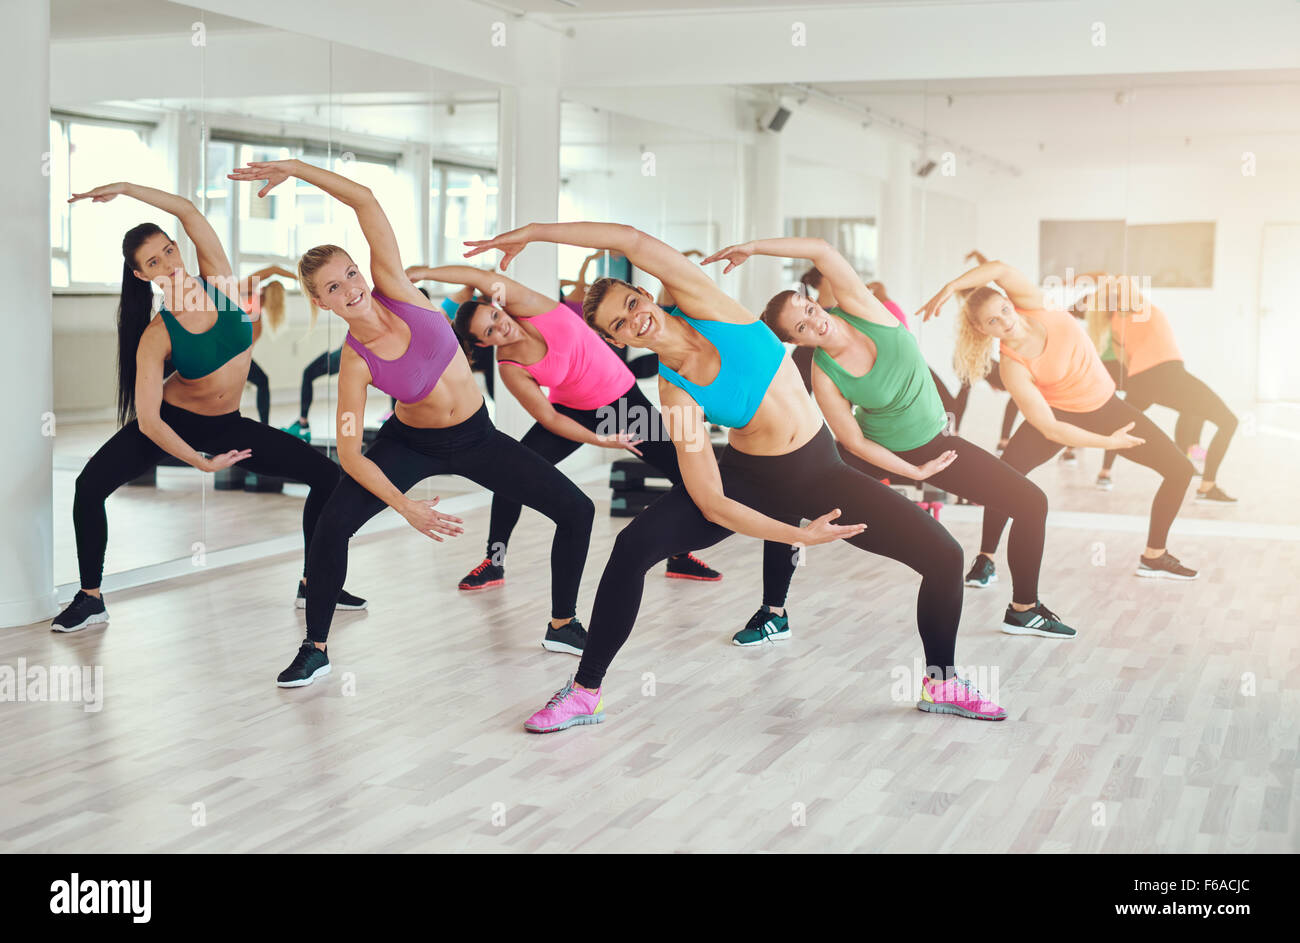 Aerobics class at a gym with a group of attractive fit young women in colorful sportswear working out in synchronisation, in a w Stock Photo